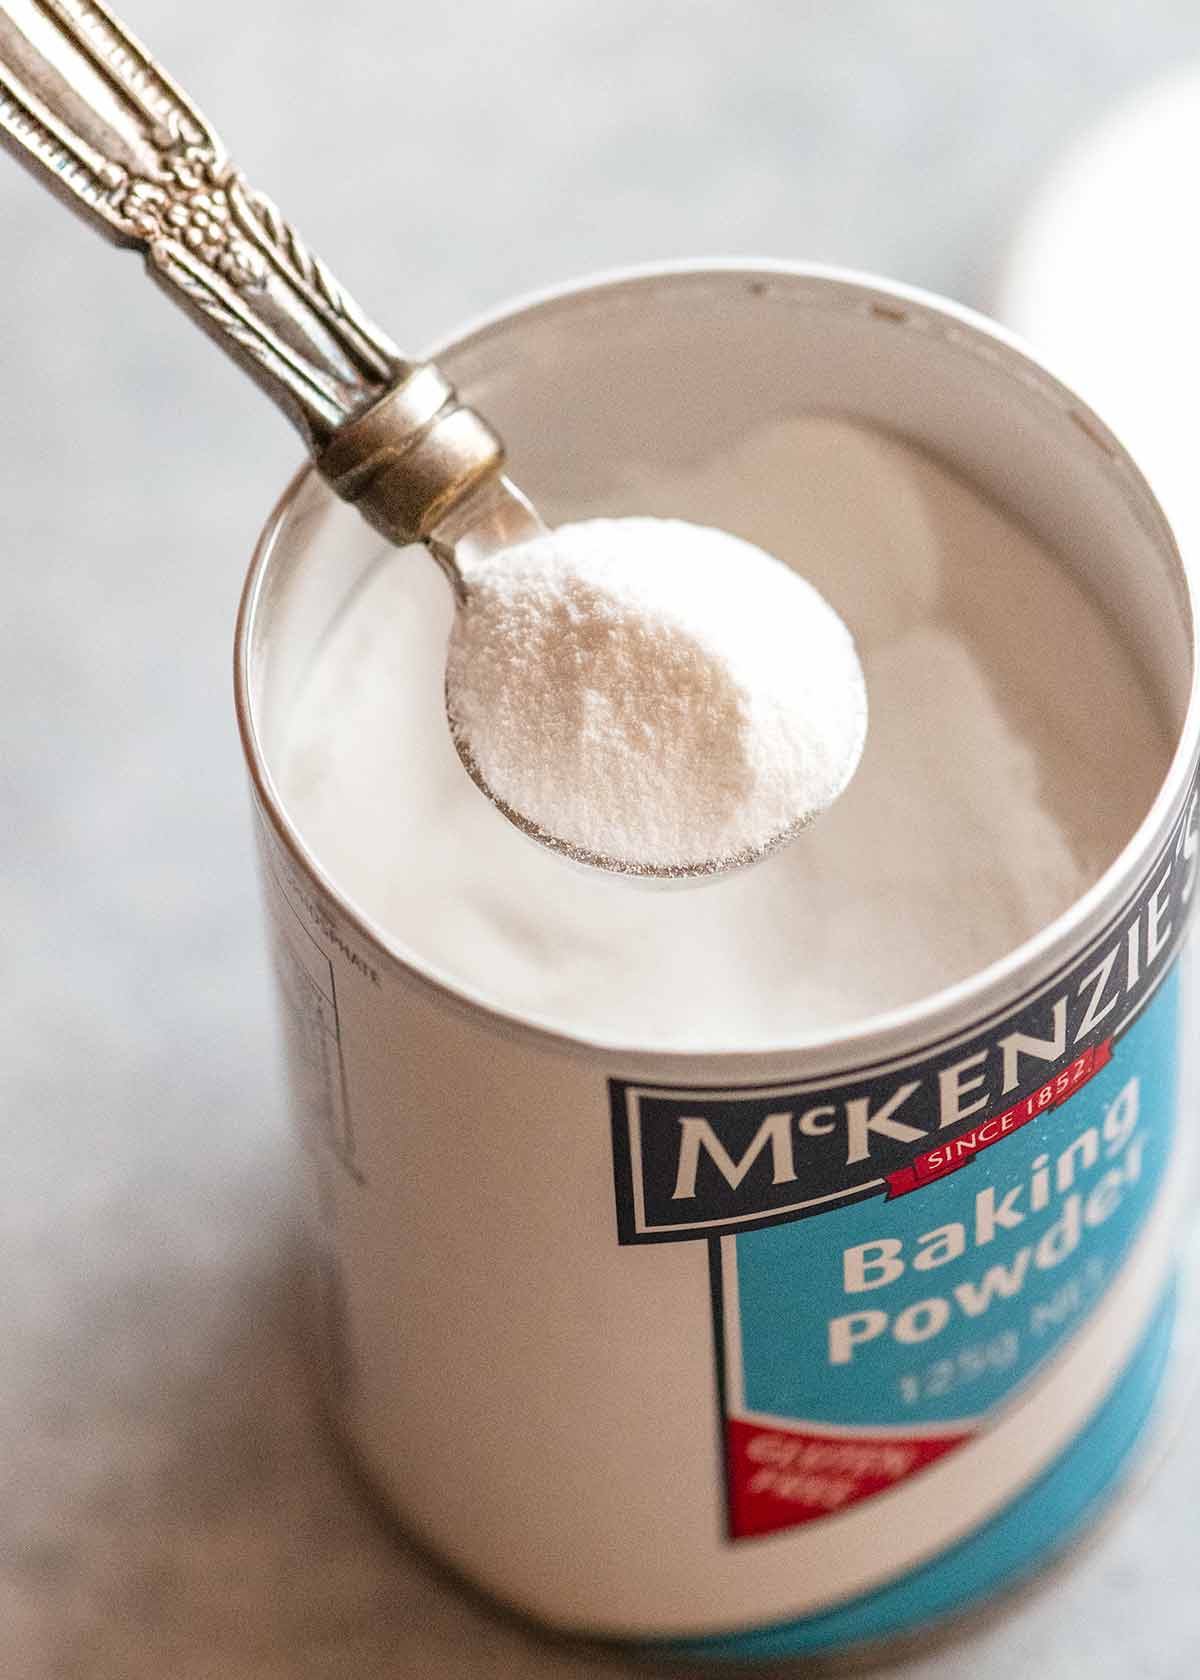 Baking basics: How to check your baking powder is still active